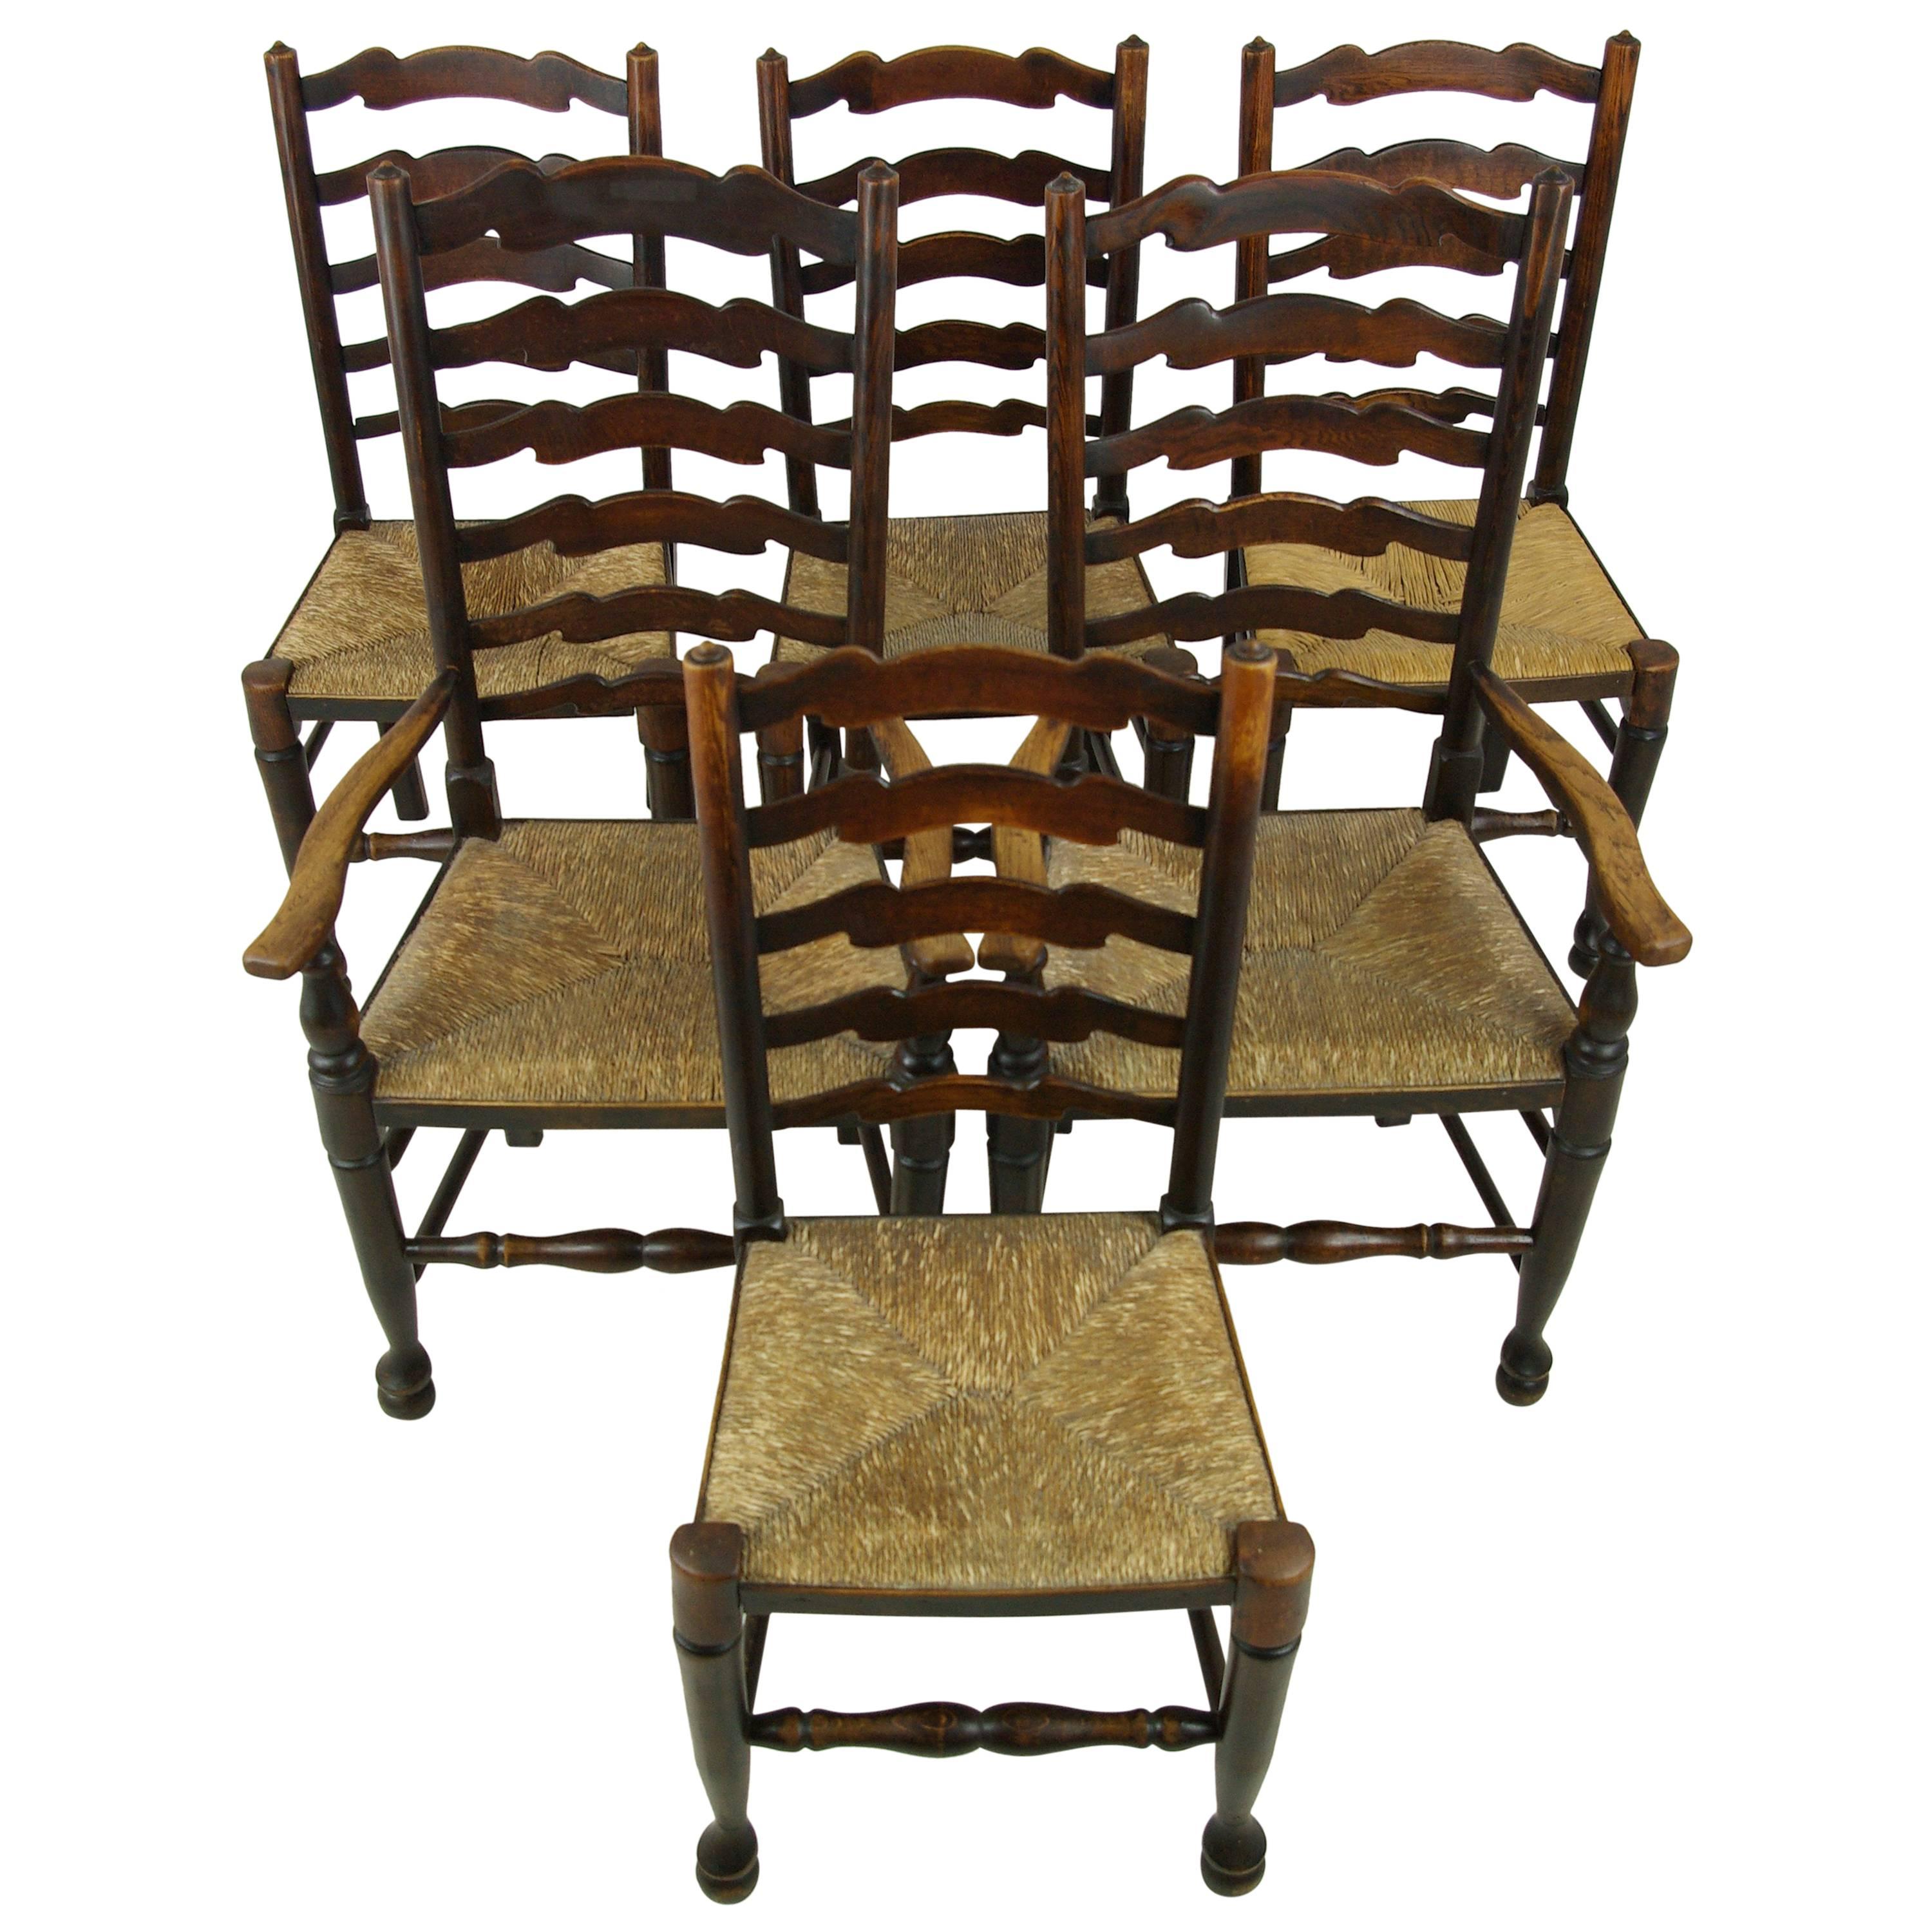 Antique Dining Chairs, Rush Chairs, Ladder Back Chairs, 1930s, B1014  REDUCED!!!